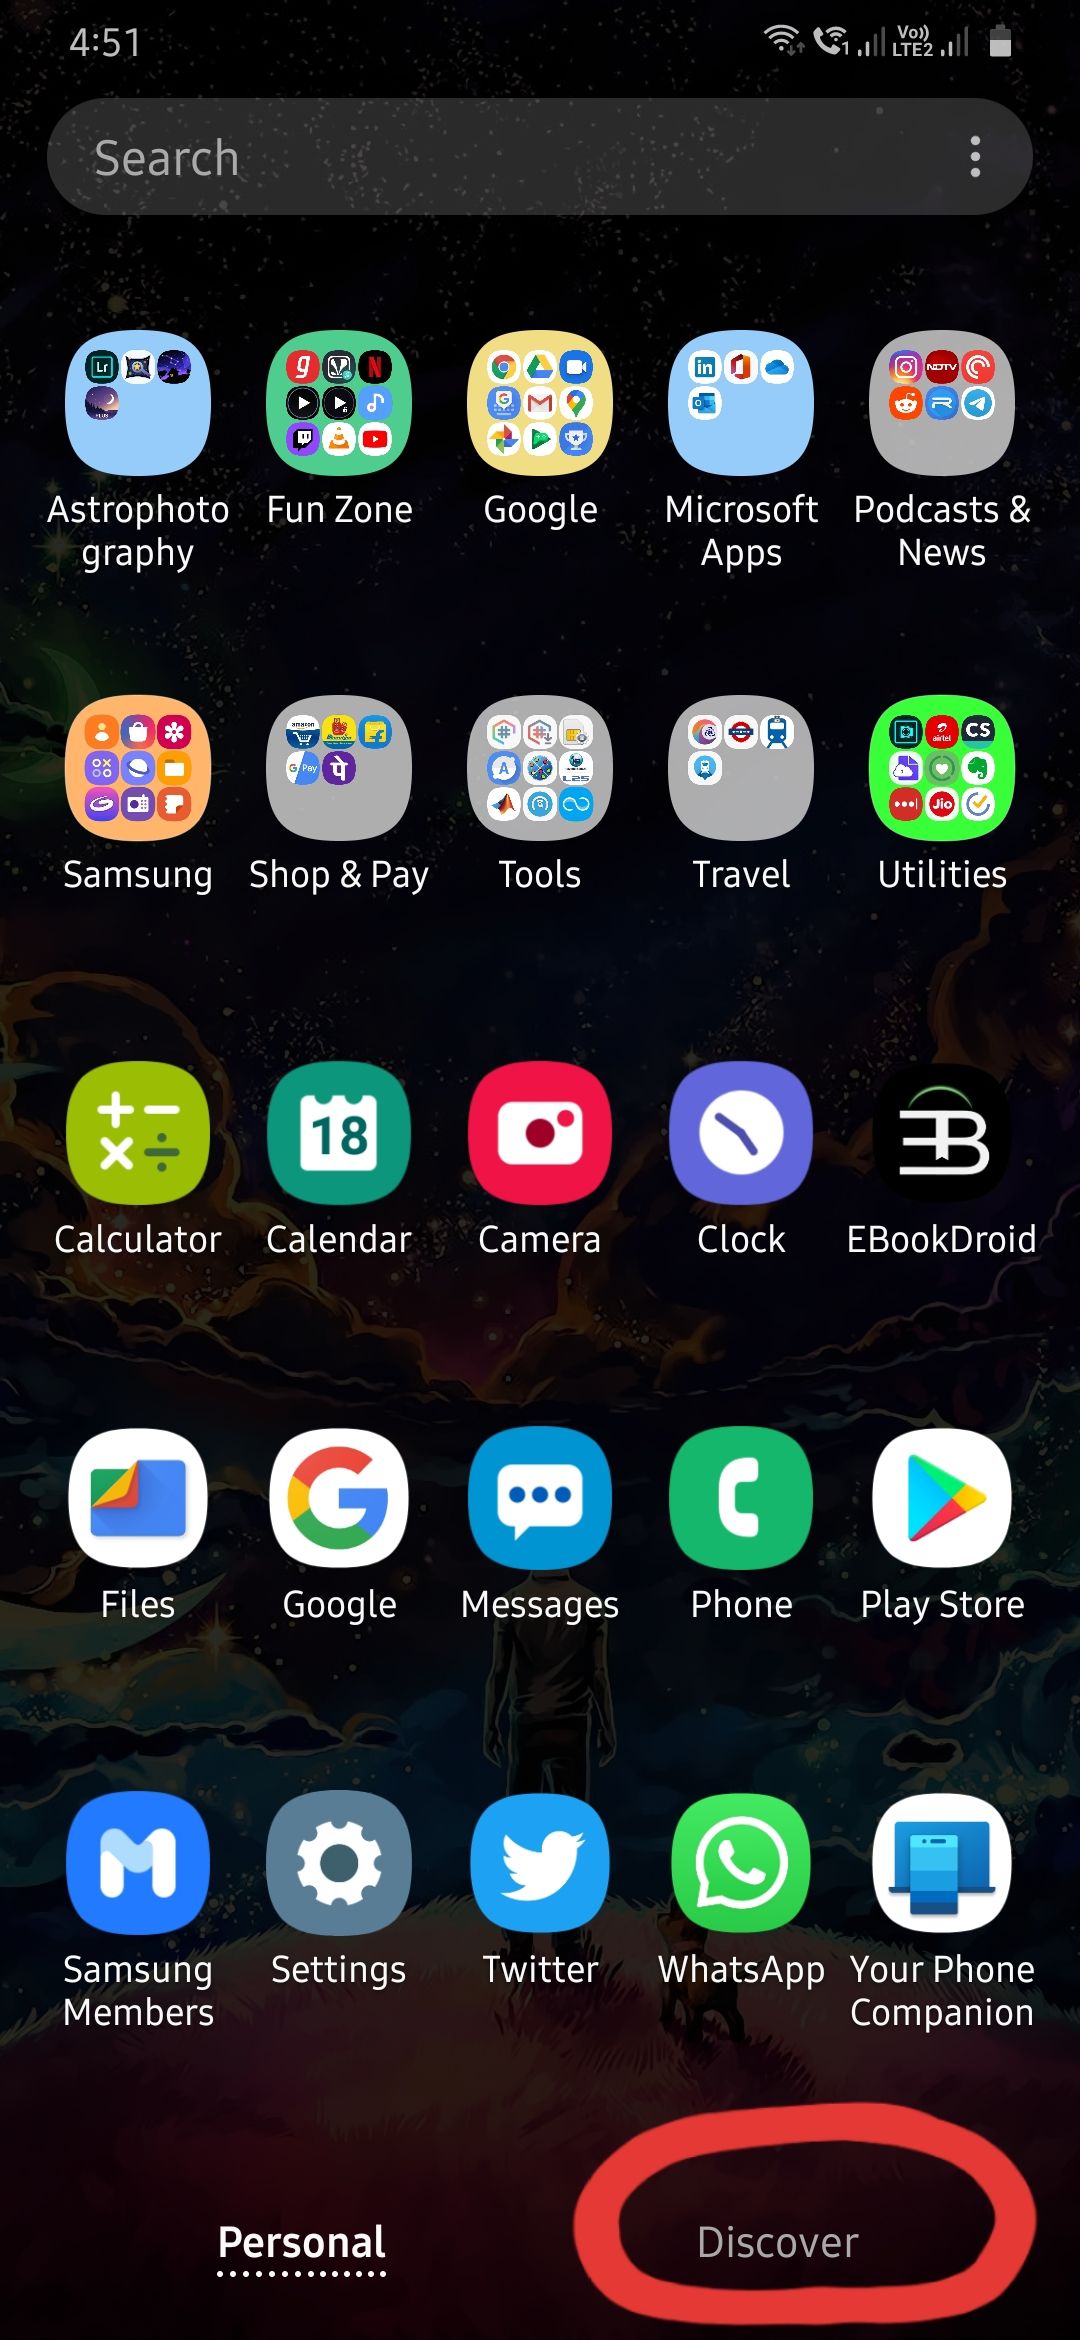 M30s- Removing the Discover Option from App Screen - Samsung Members